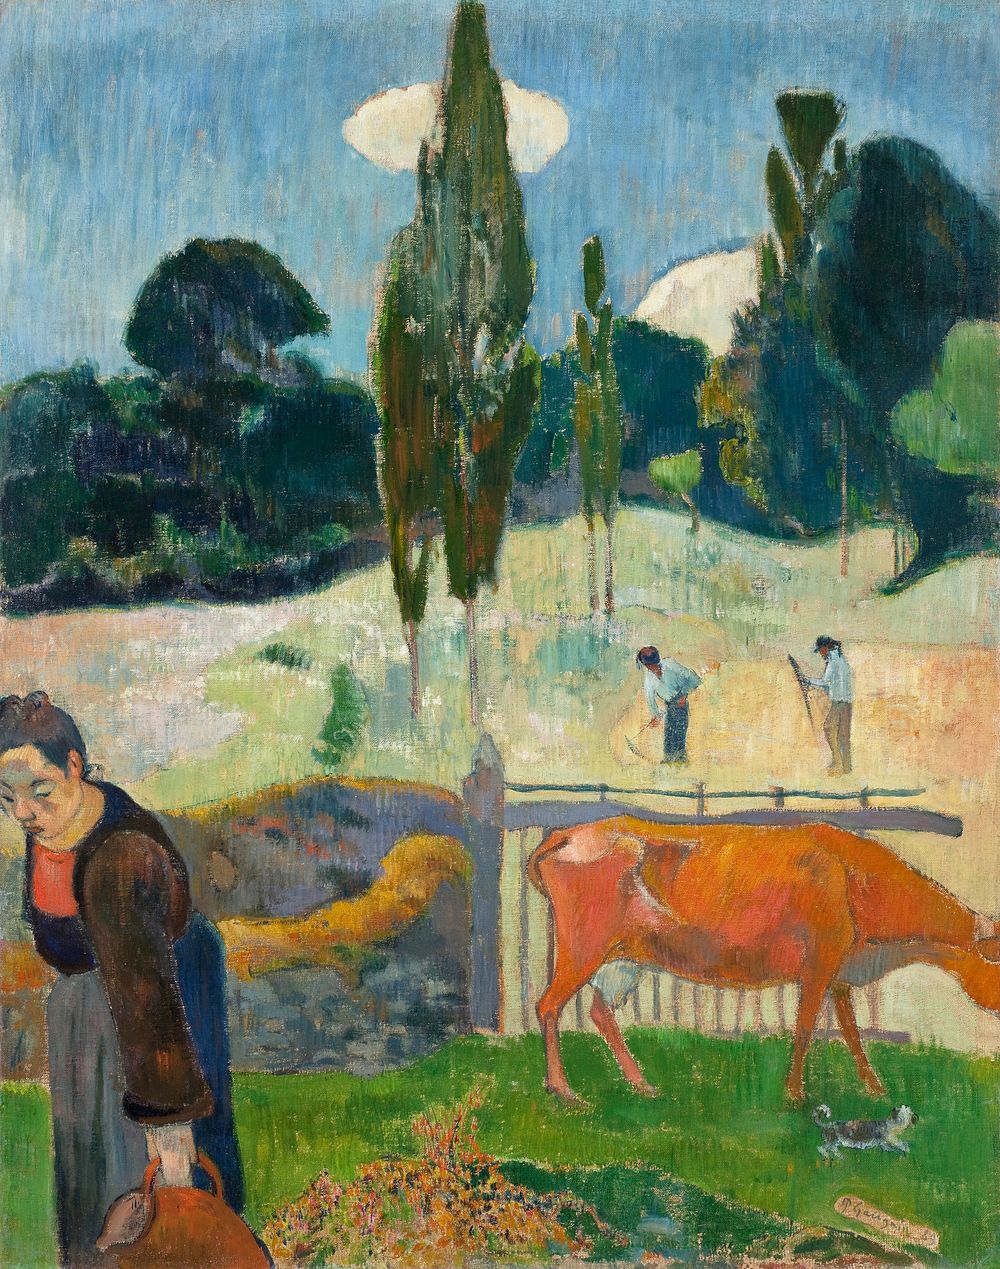 The Red Cow (1889) by Paul Gauguin. Original from the Los Angeles County Museum of Art. Digitally enhanced by rawpixel.